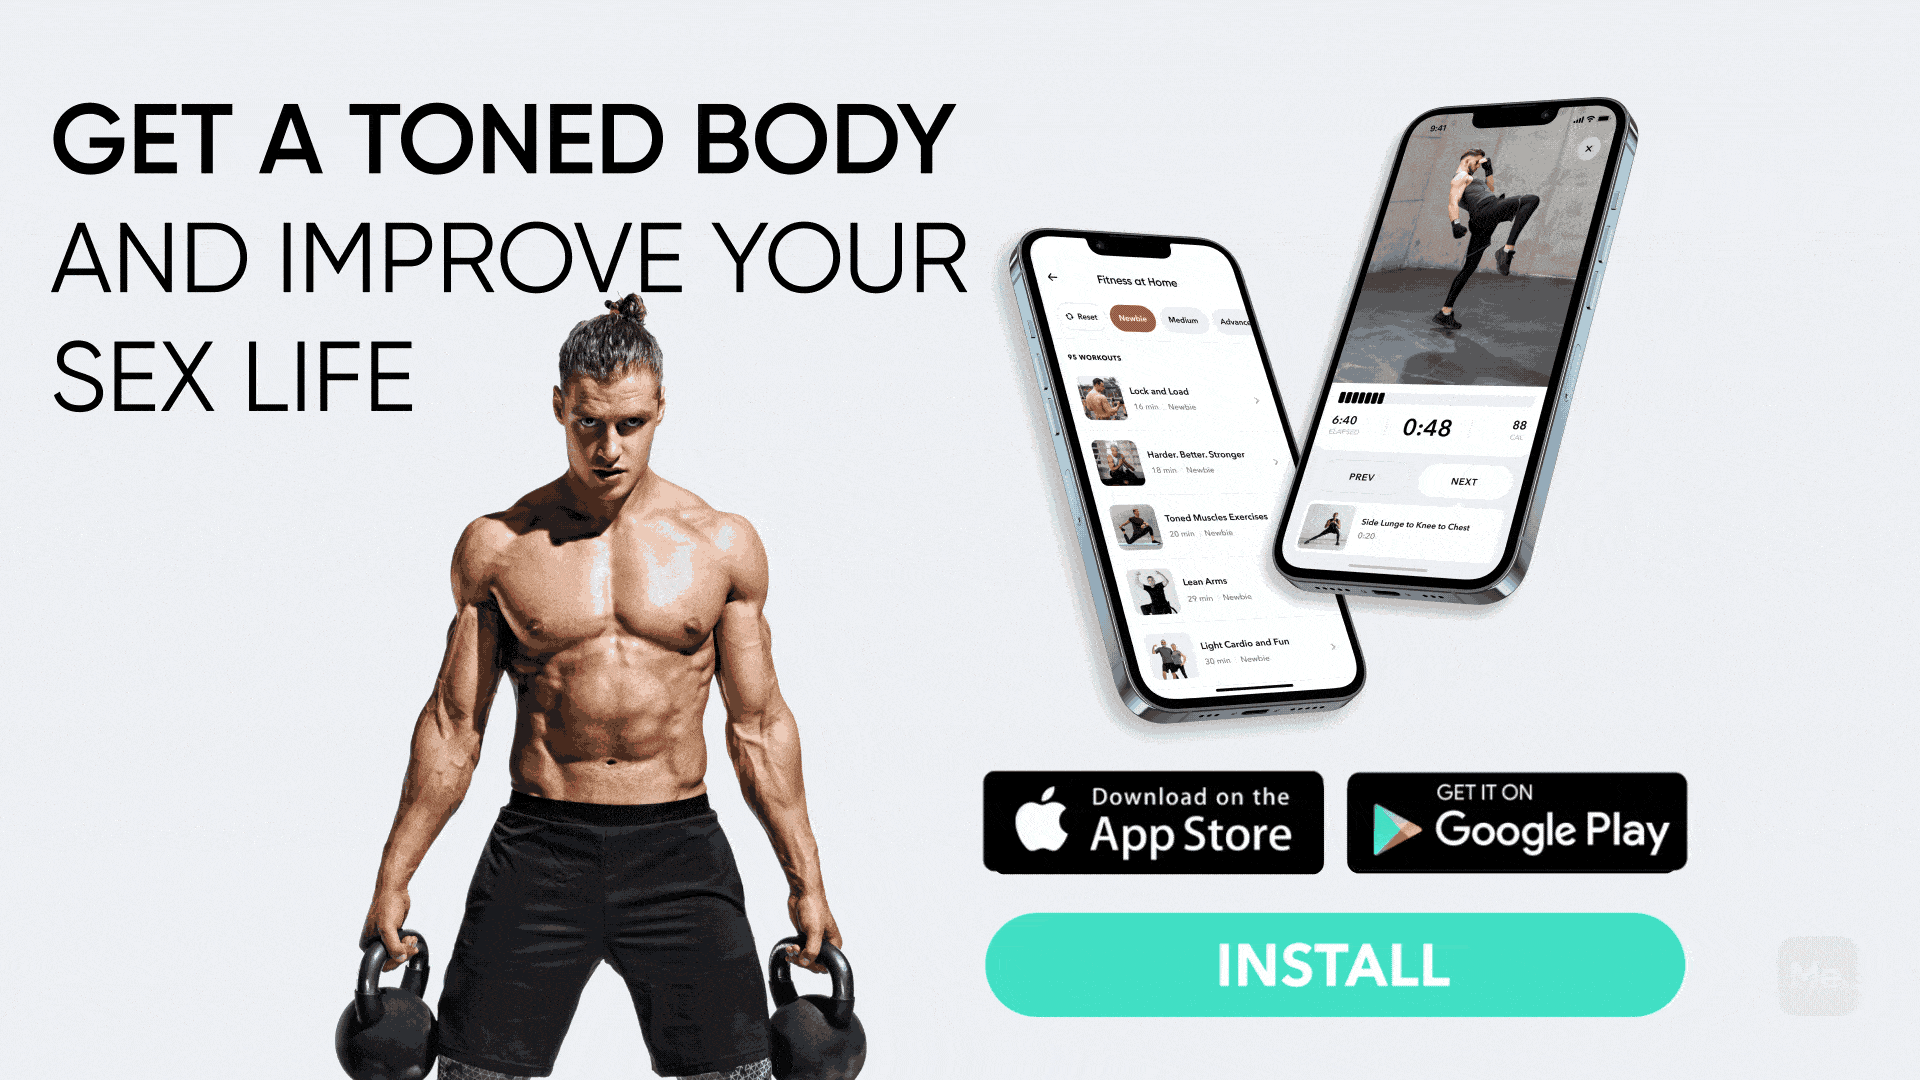 Get a toned body and improve your sex life